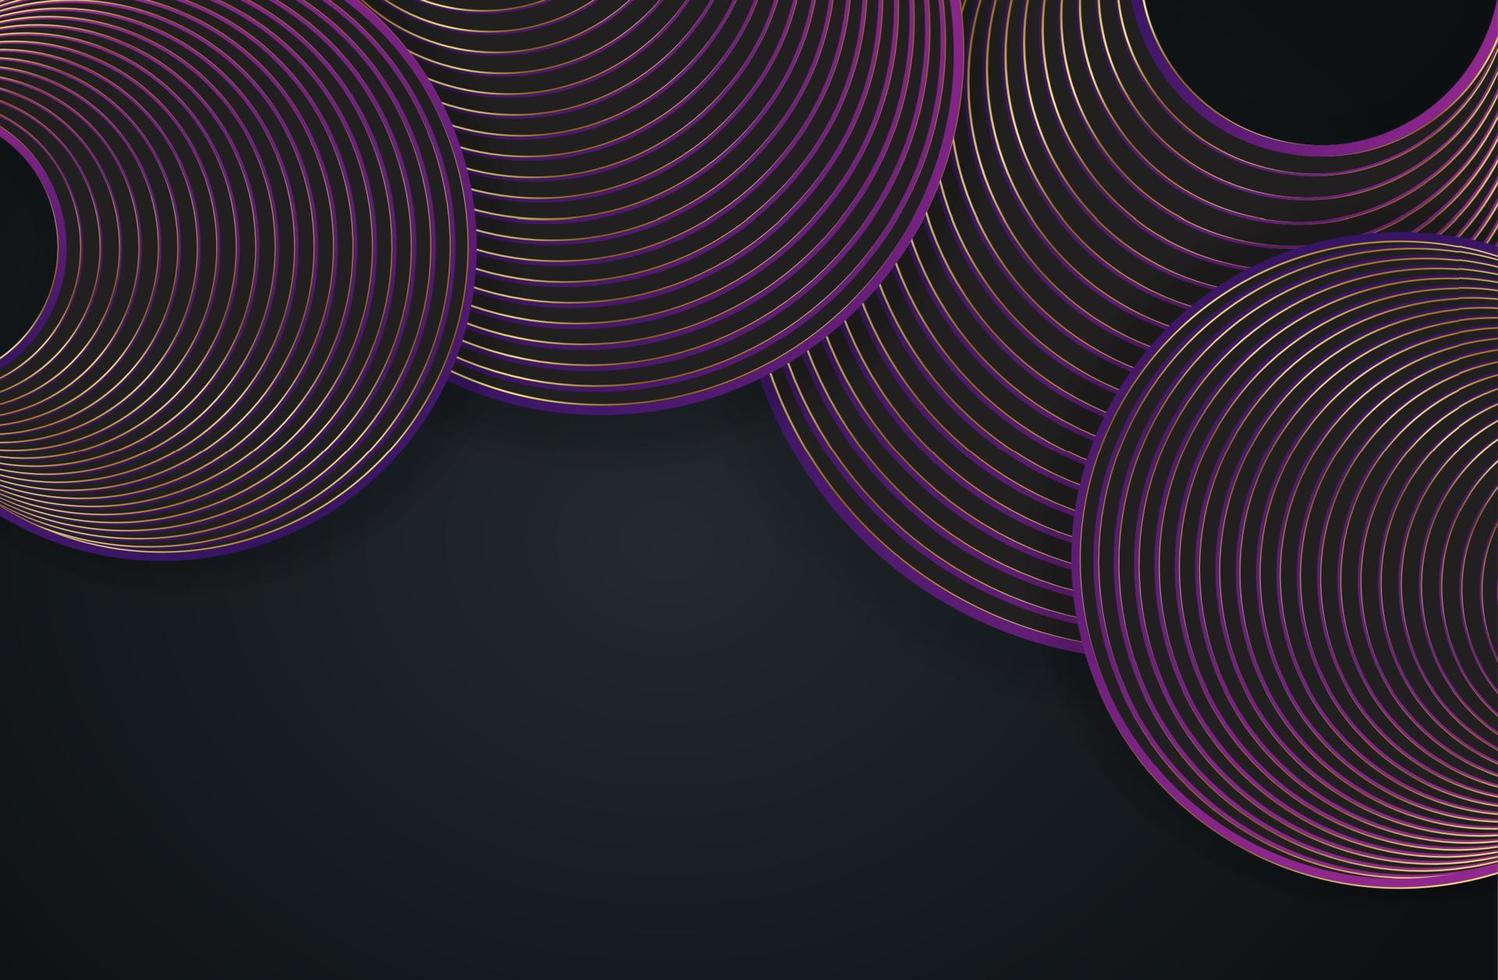 Abstract Fashion gold and purple circles, curved round lines on black background with lighting effect and sparkle with copy space for text. Luxury design style. Vector illustration, banner template